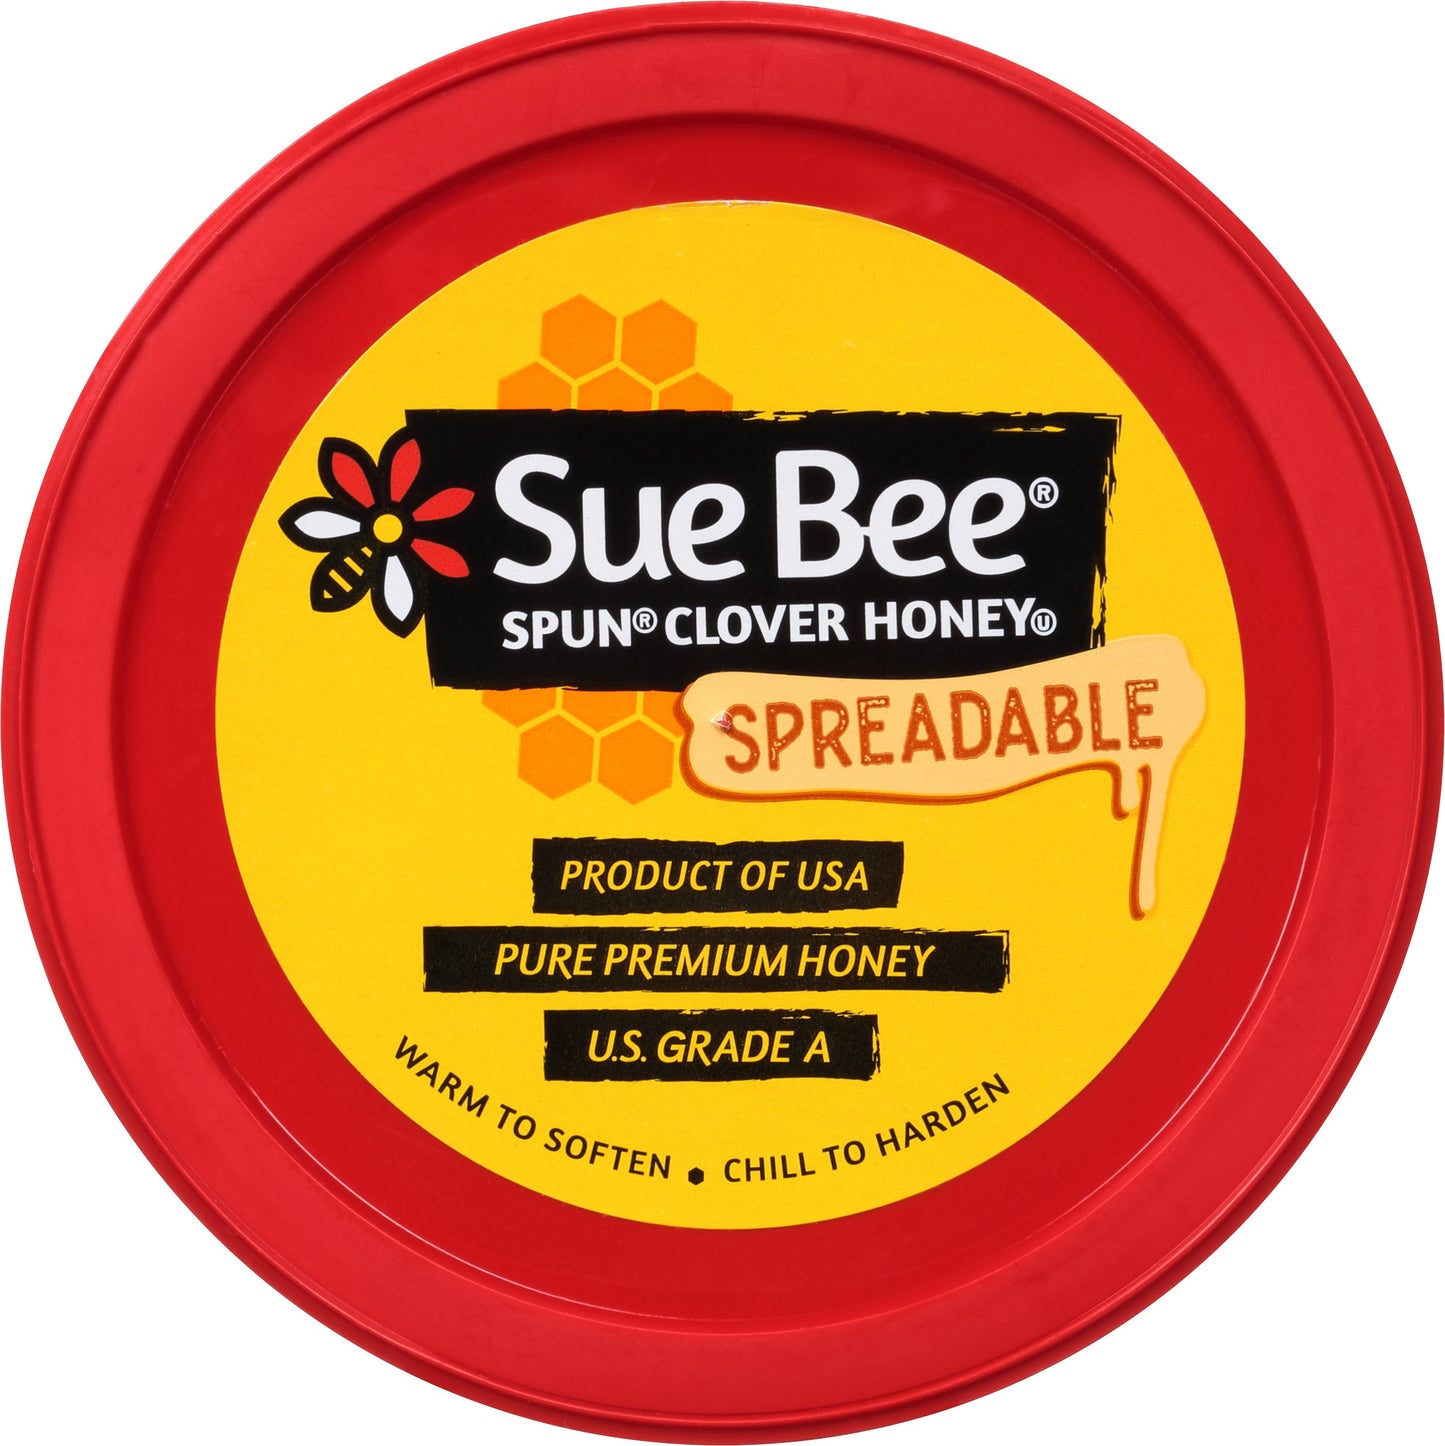 Sue Bee Spun USA Clover Honey, 12 Ounce (Pack of 6) Sue Bee Pure Premium Clover Honey From USA Beekeepers